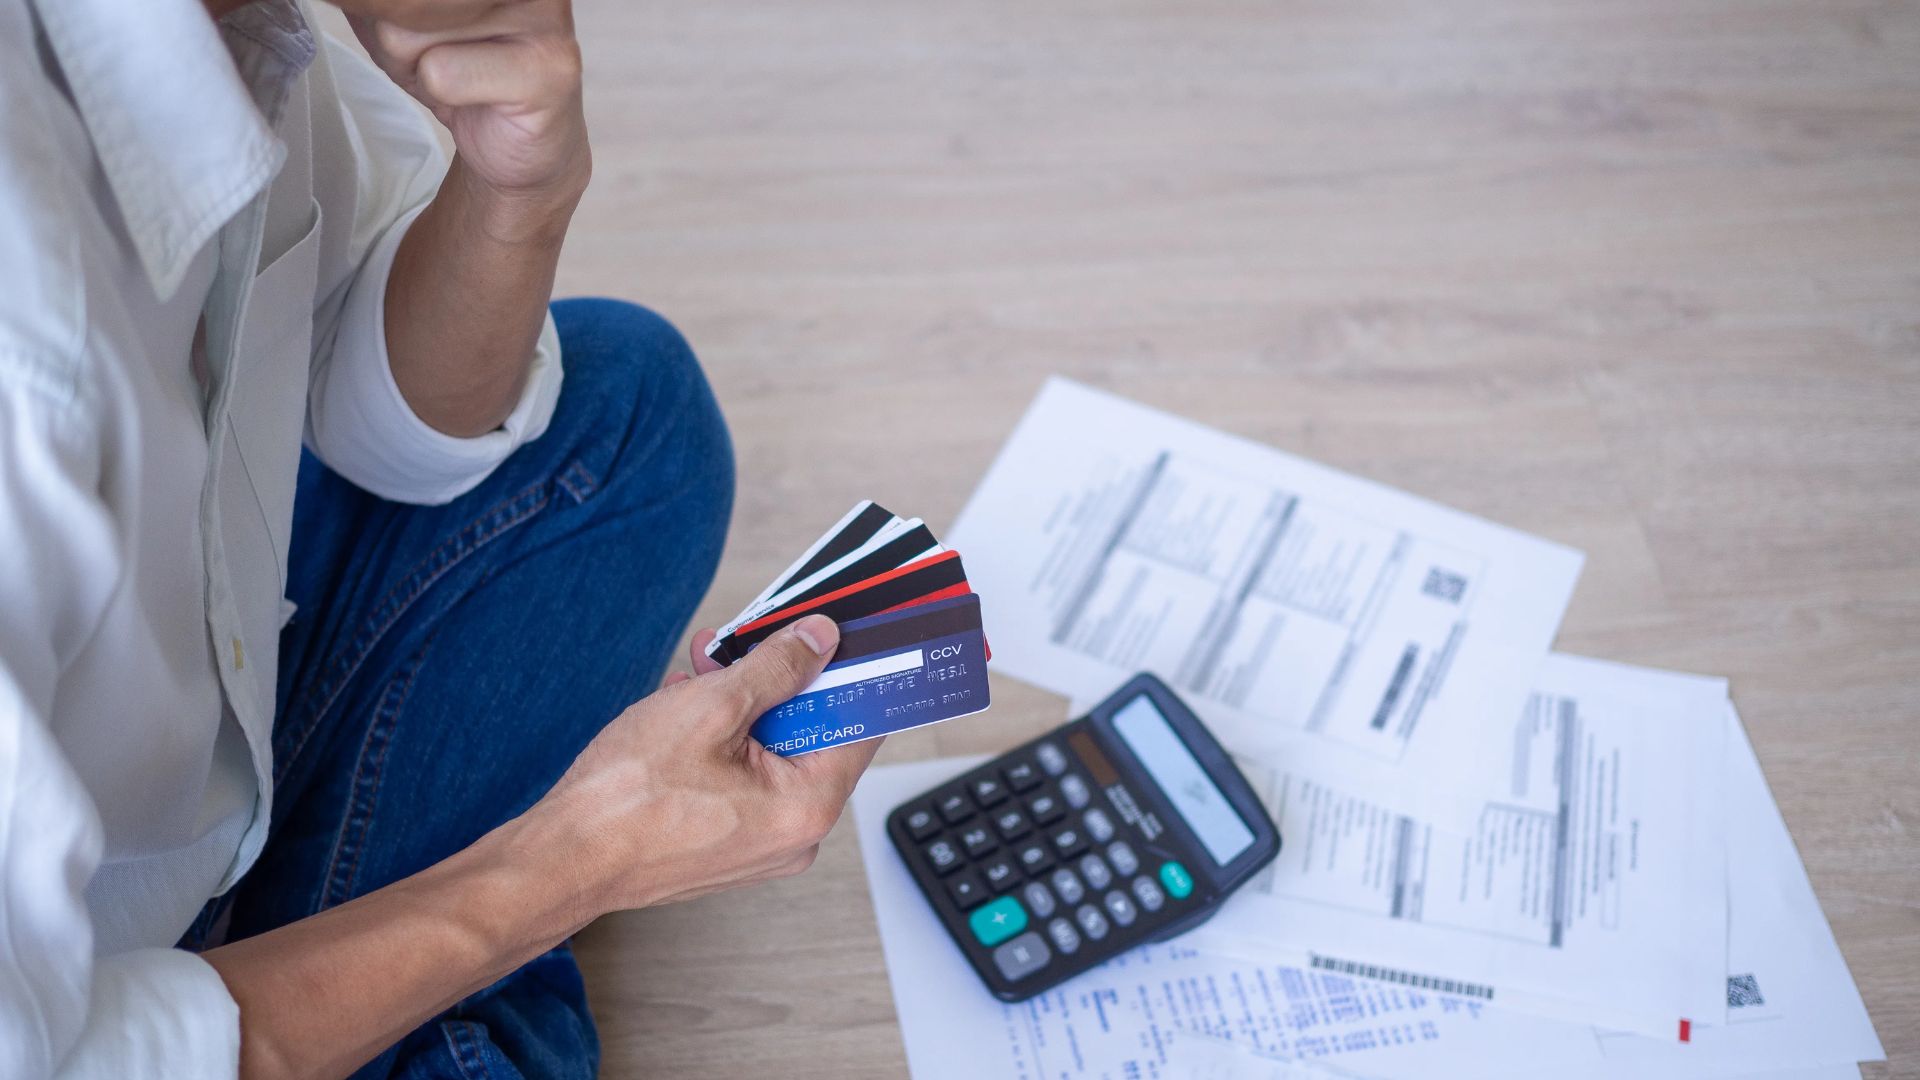 Understanding the Art of Negotiating Credit Card Debt in the Current Economy